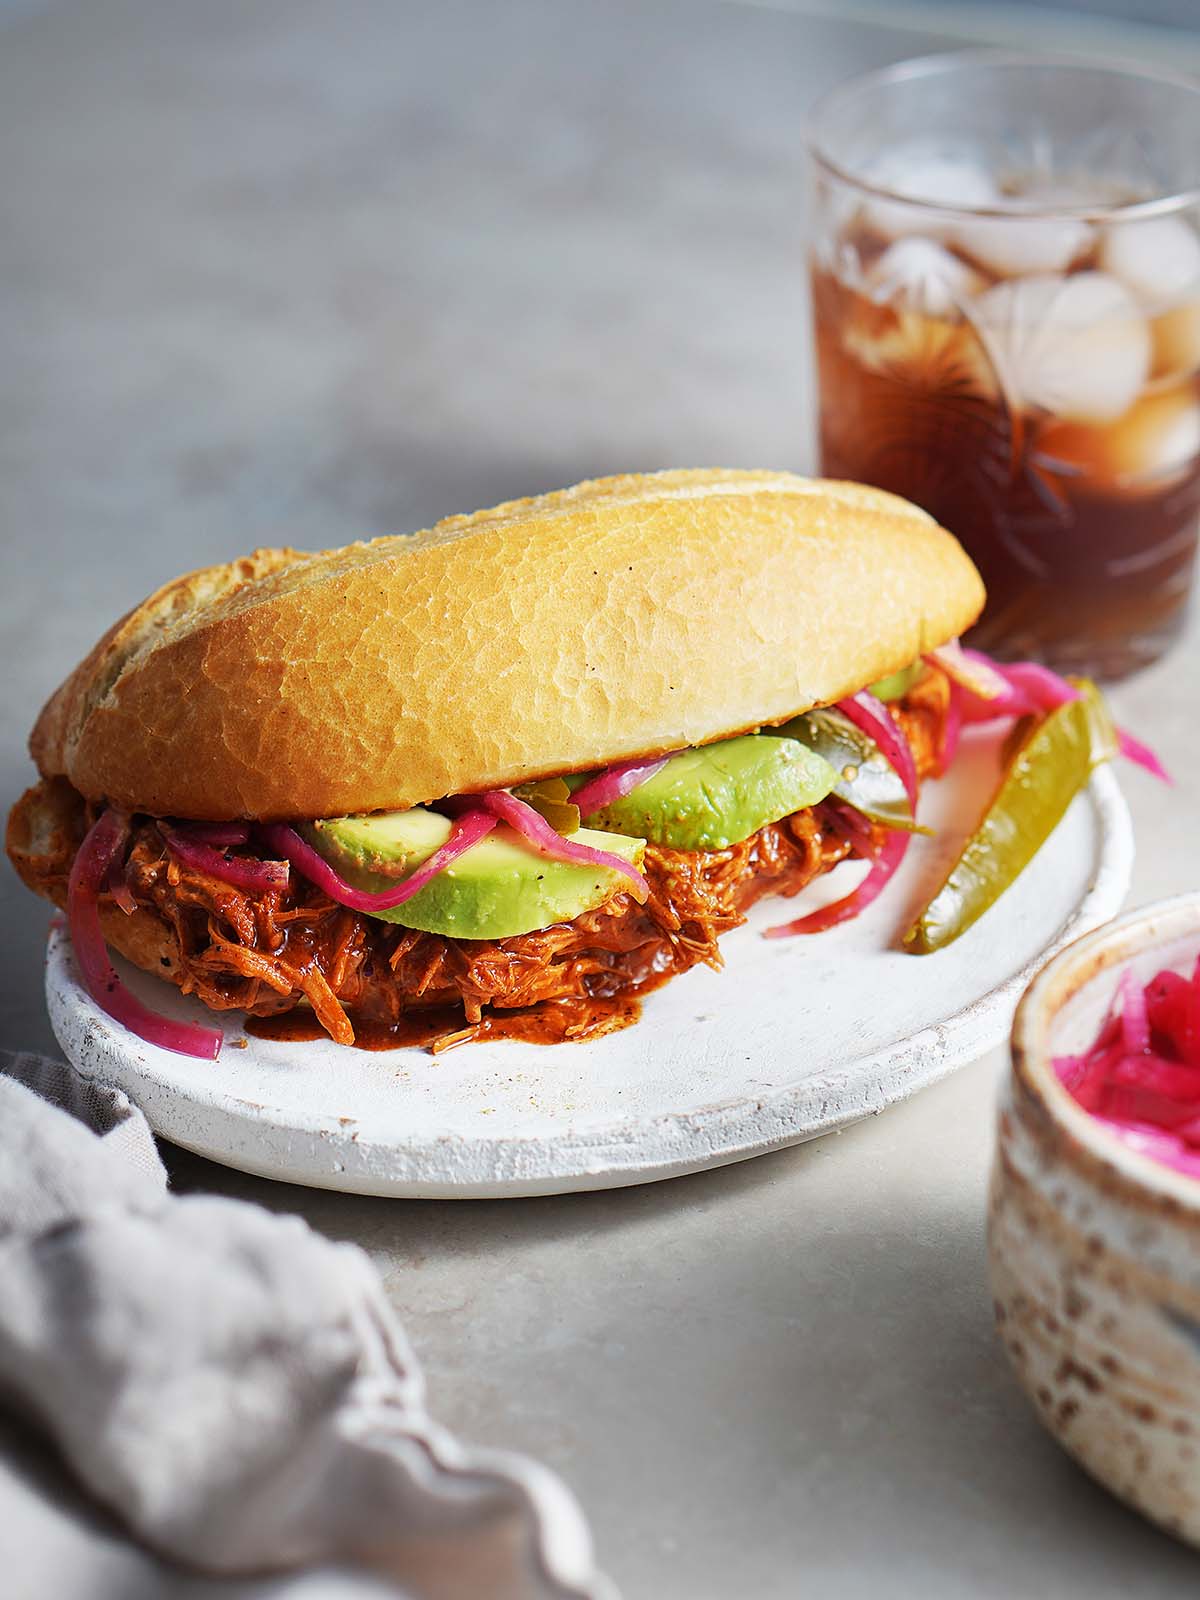 A Cochinita (Pork) Pibil Torta placed on a white plate with a drink on the back.